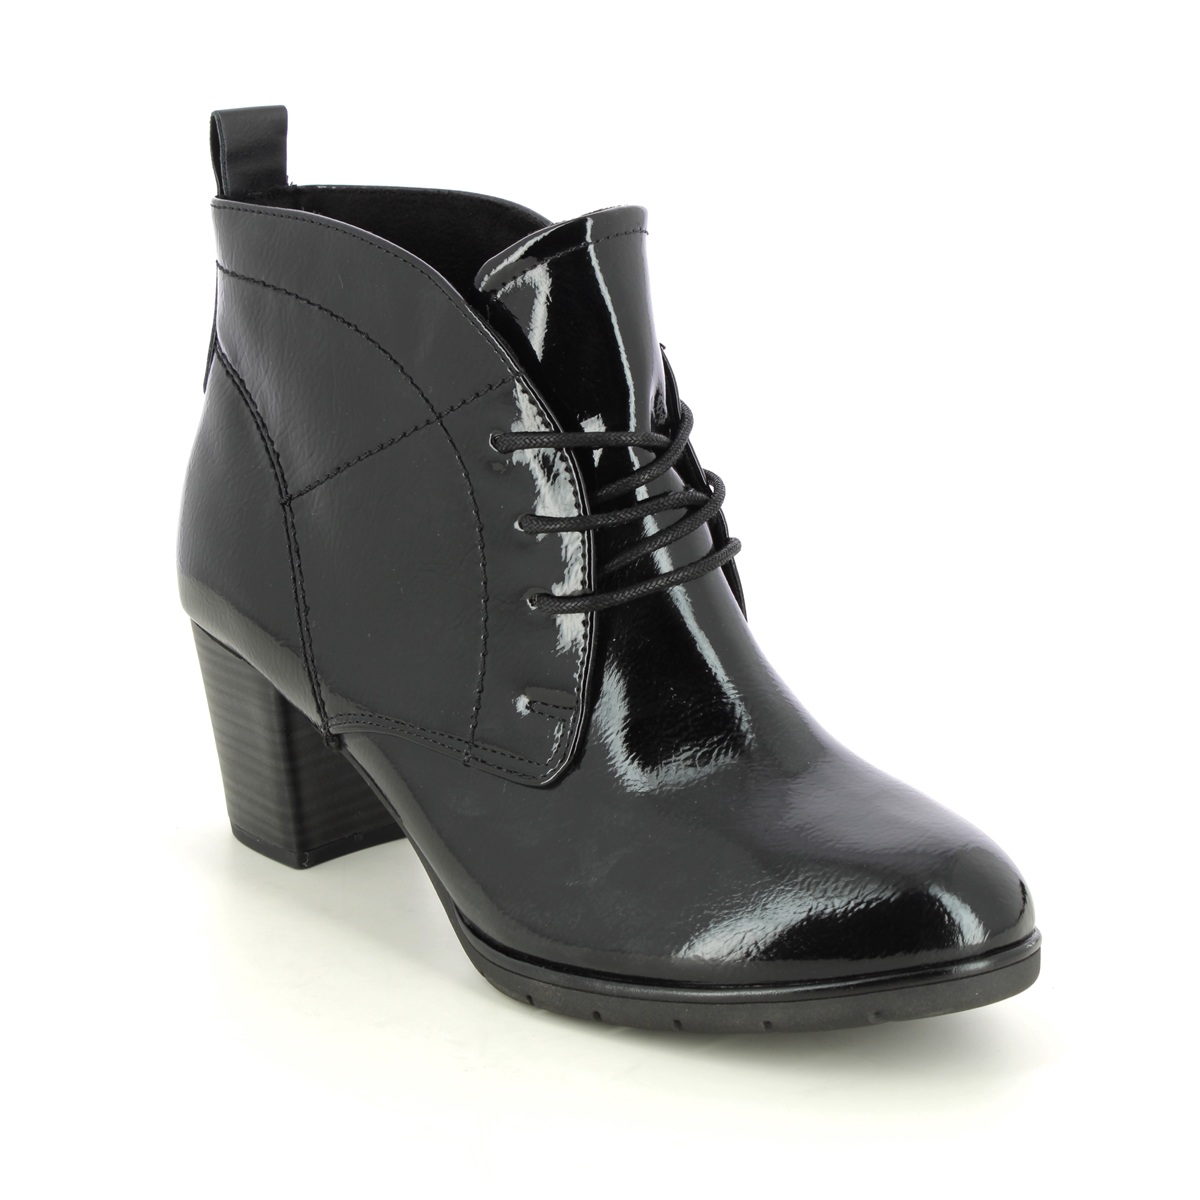 Marco Tozzi Pepalow Black Patent Womens Heeled Boots 25109-41-018 In Size 40 In Plain Black Patent